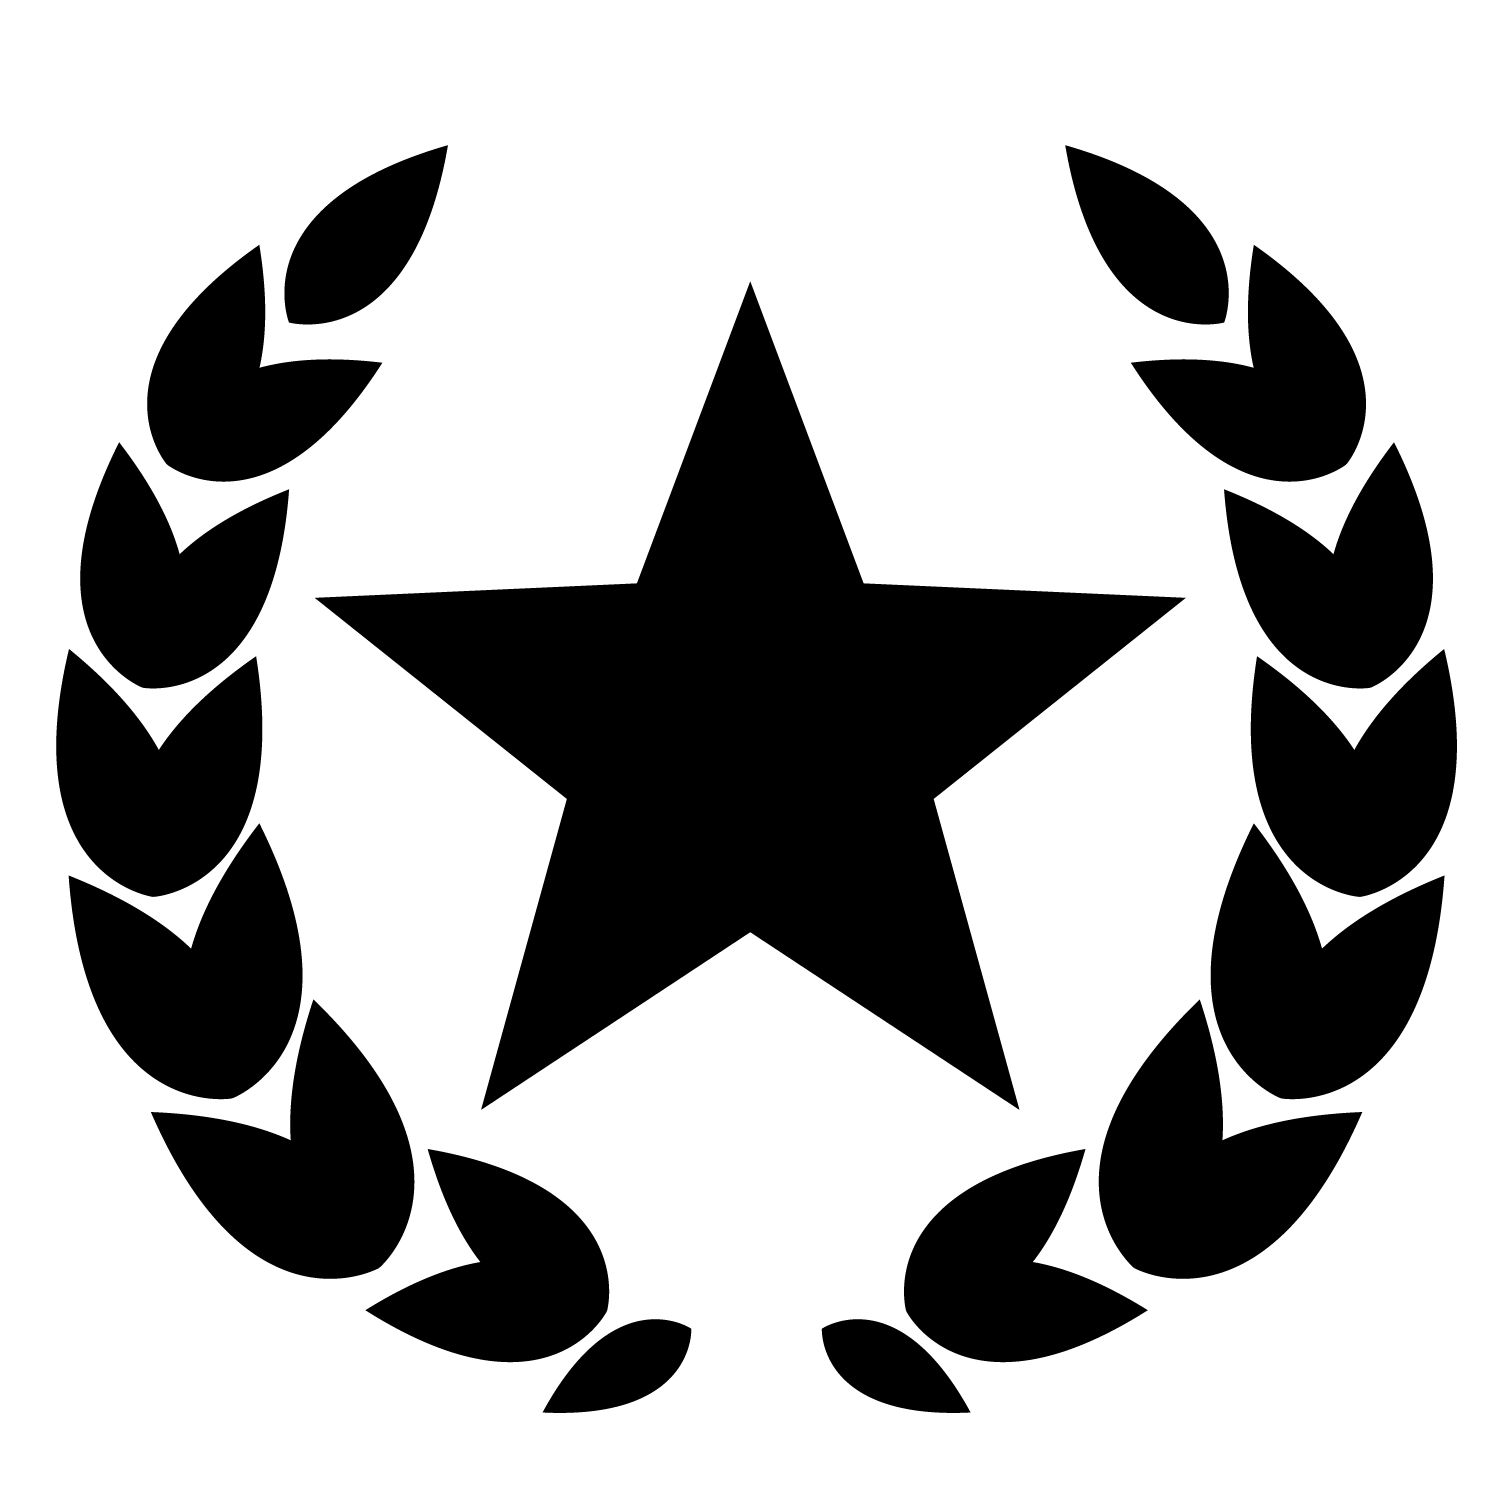 20 - Star and Wreath.png